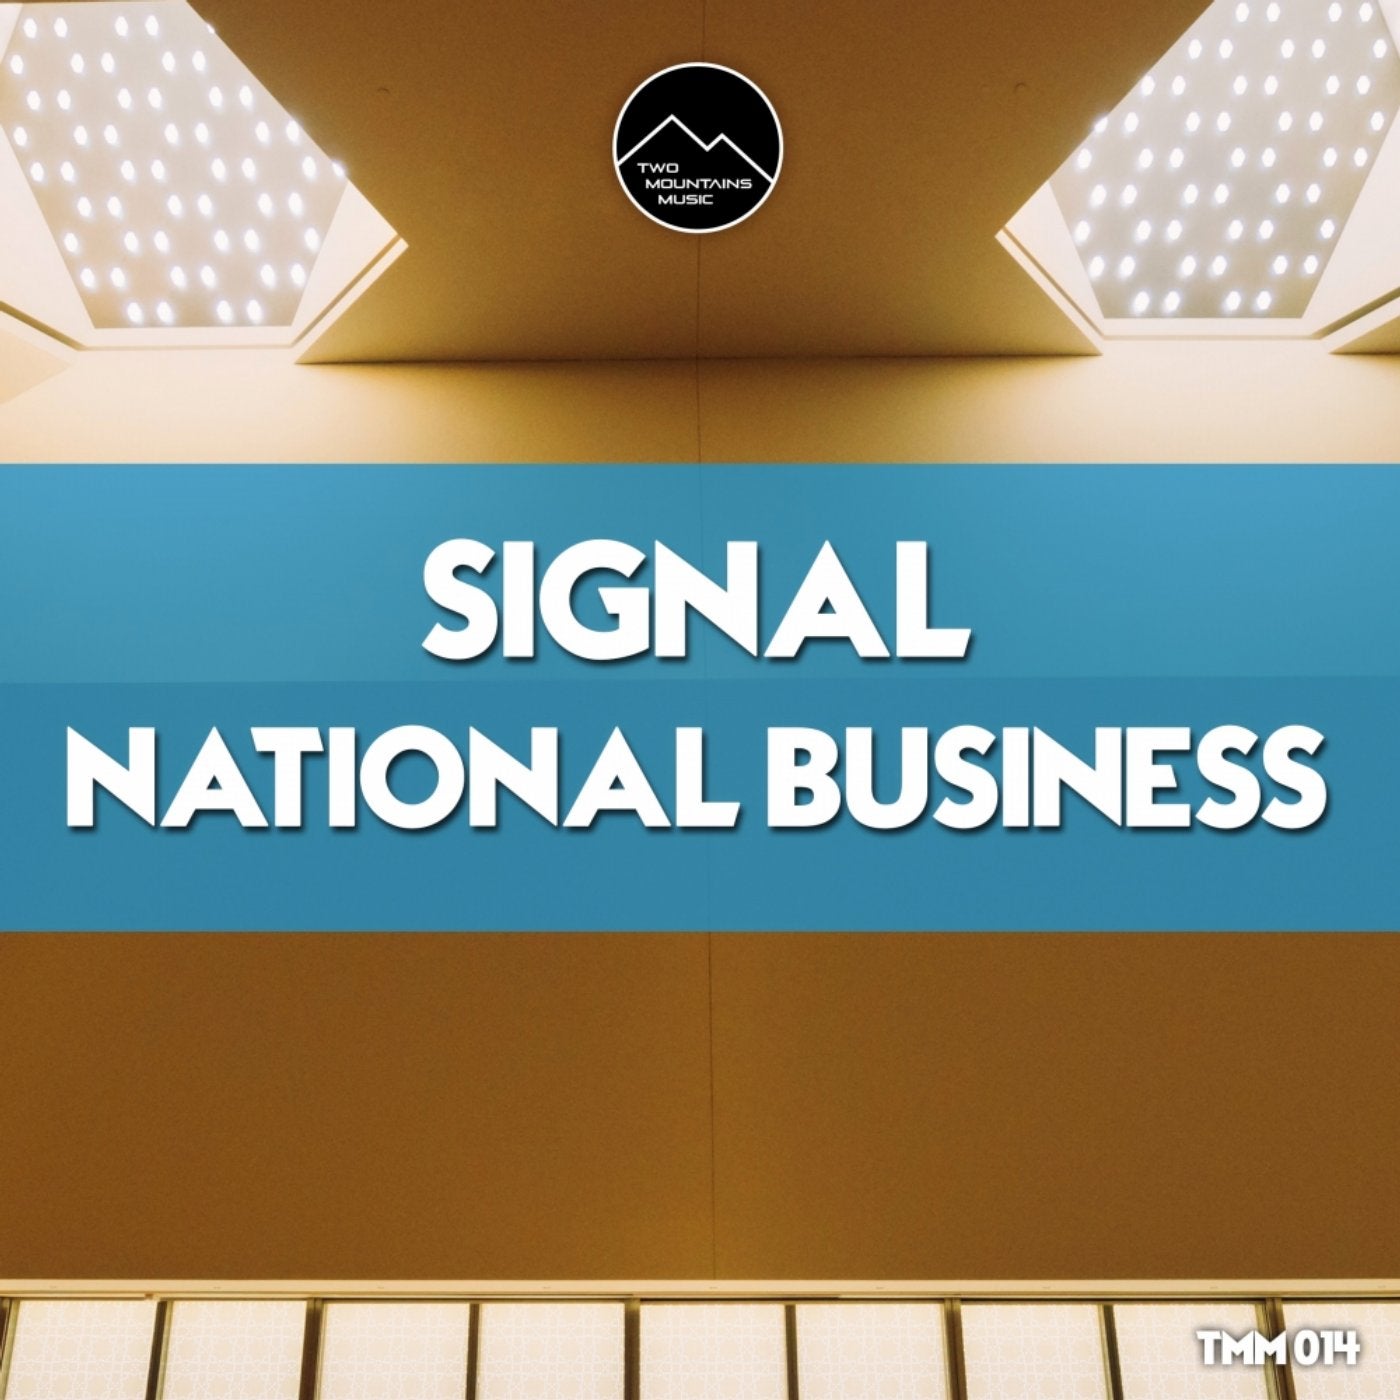 National Business